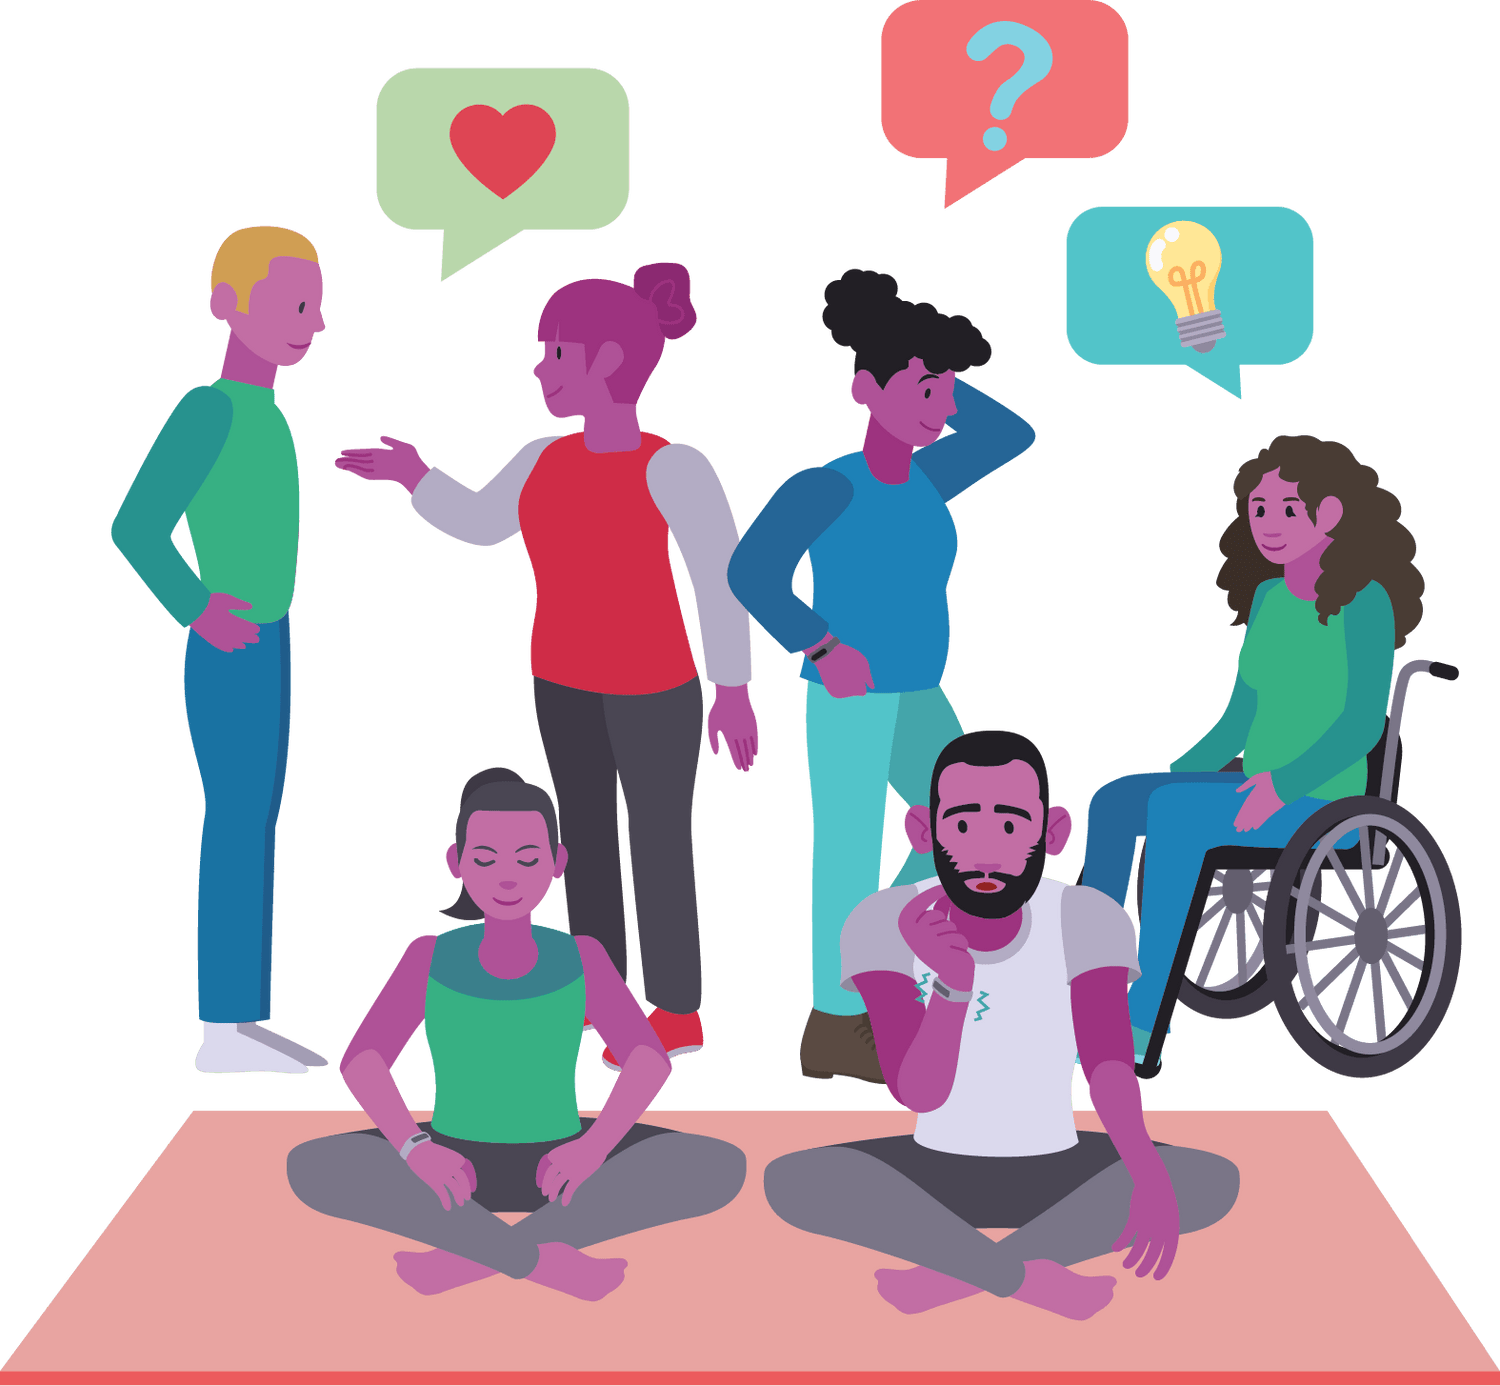 A group of people sitting on a yoga mat with speech bubbles.